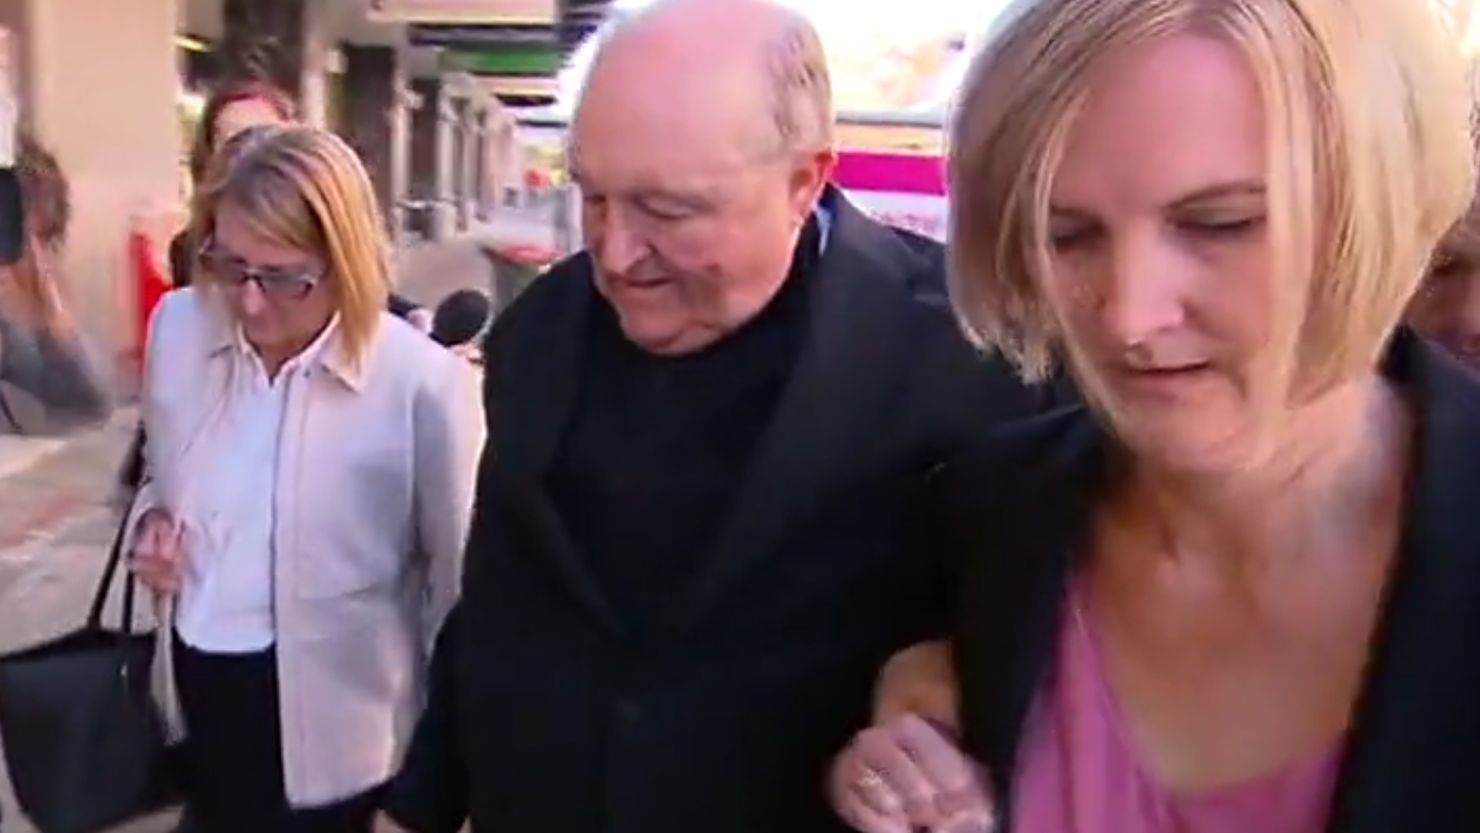 Australian Archbishop Philip Wilson is the highest-ranking Catholic official convicted of covering up sexual abuse.